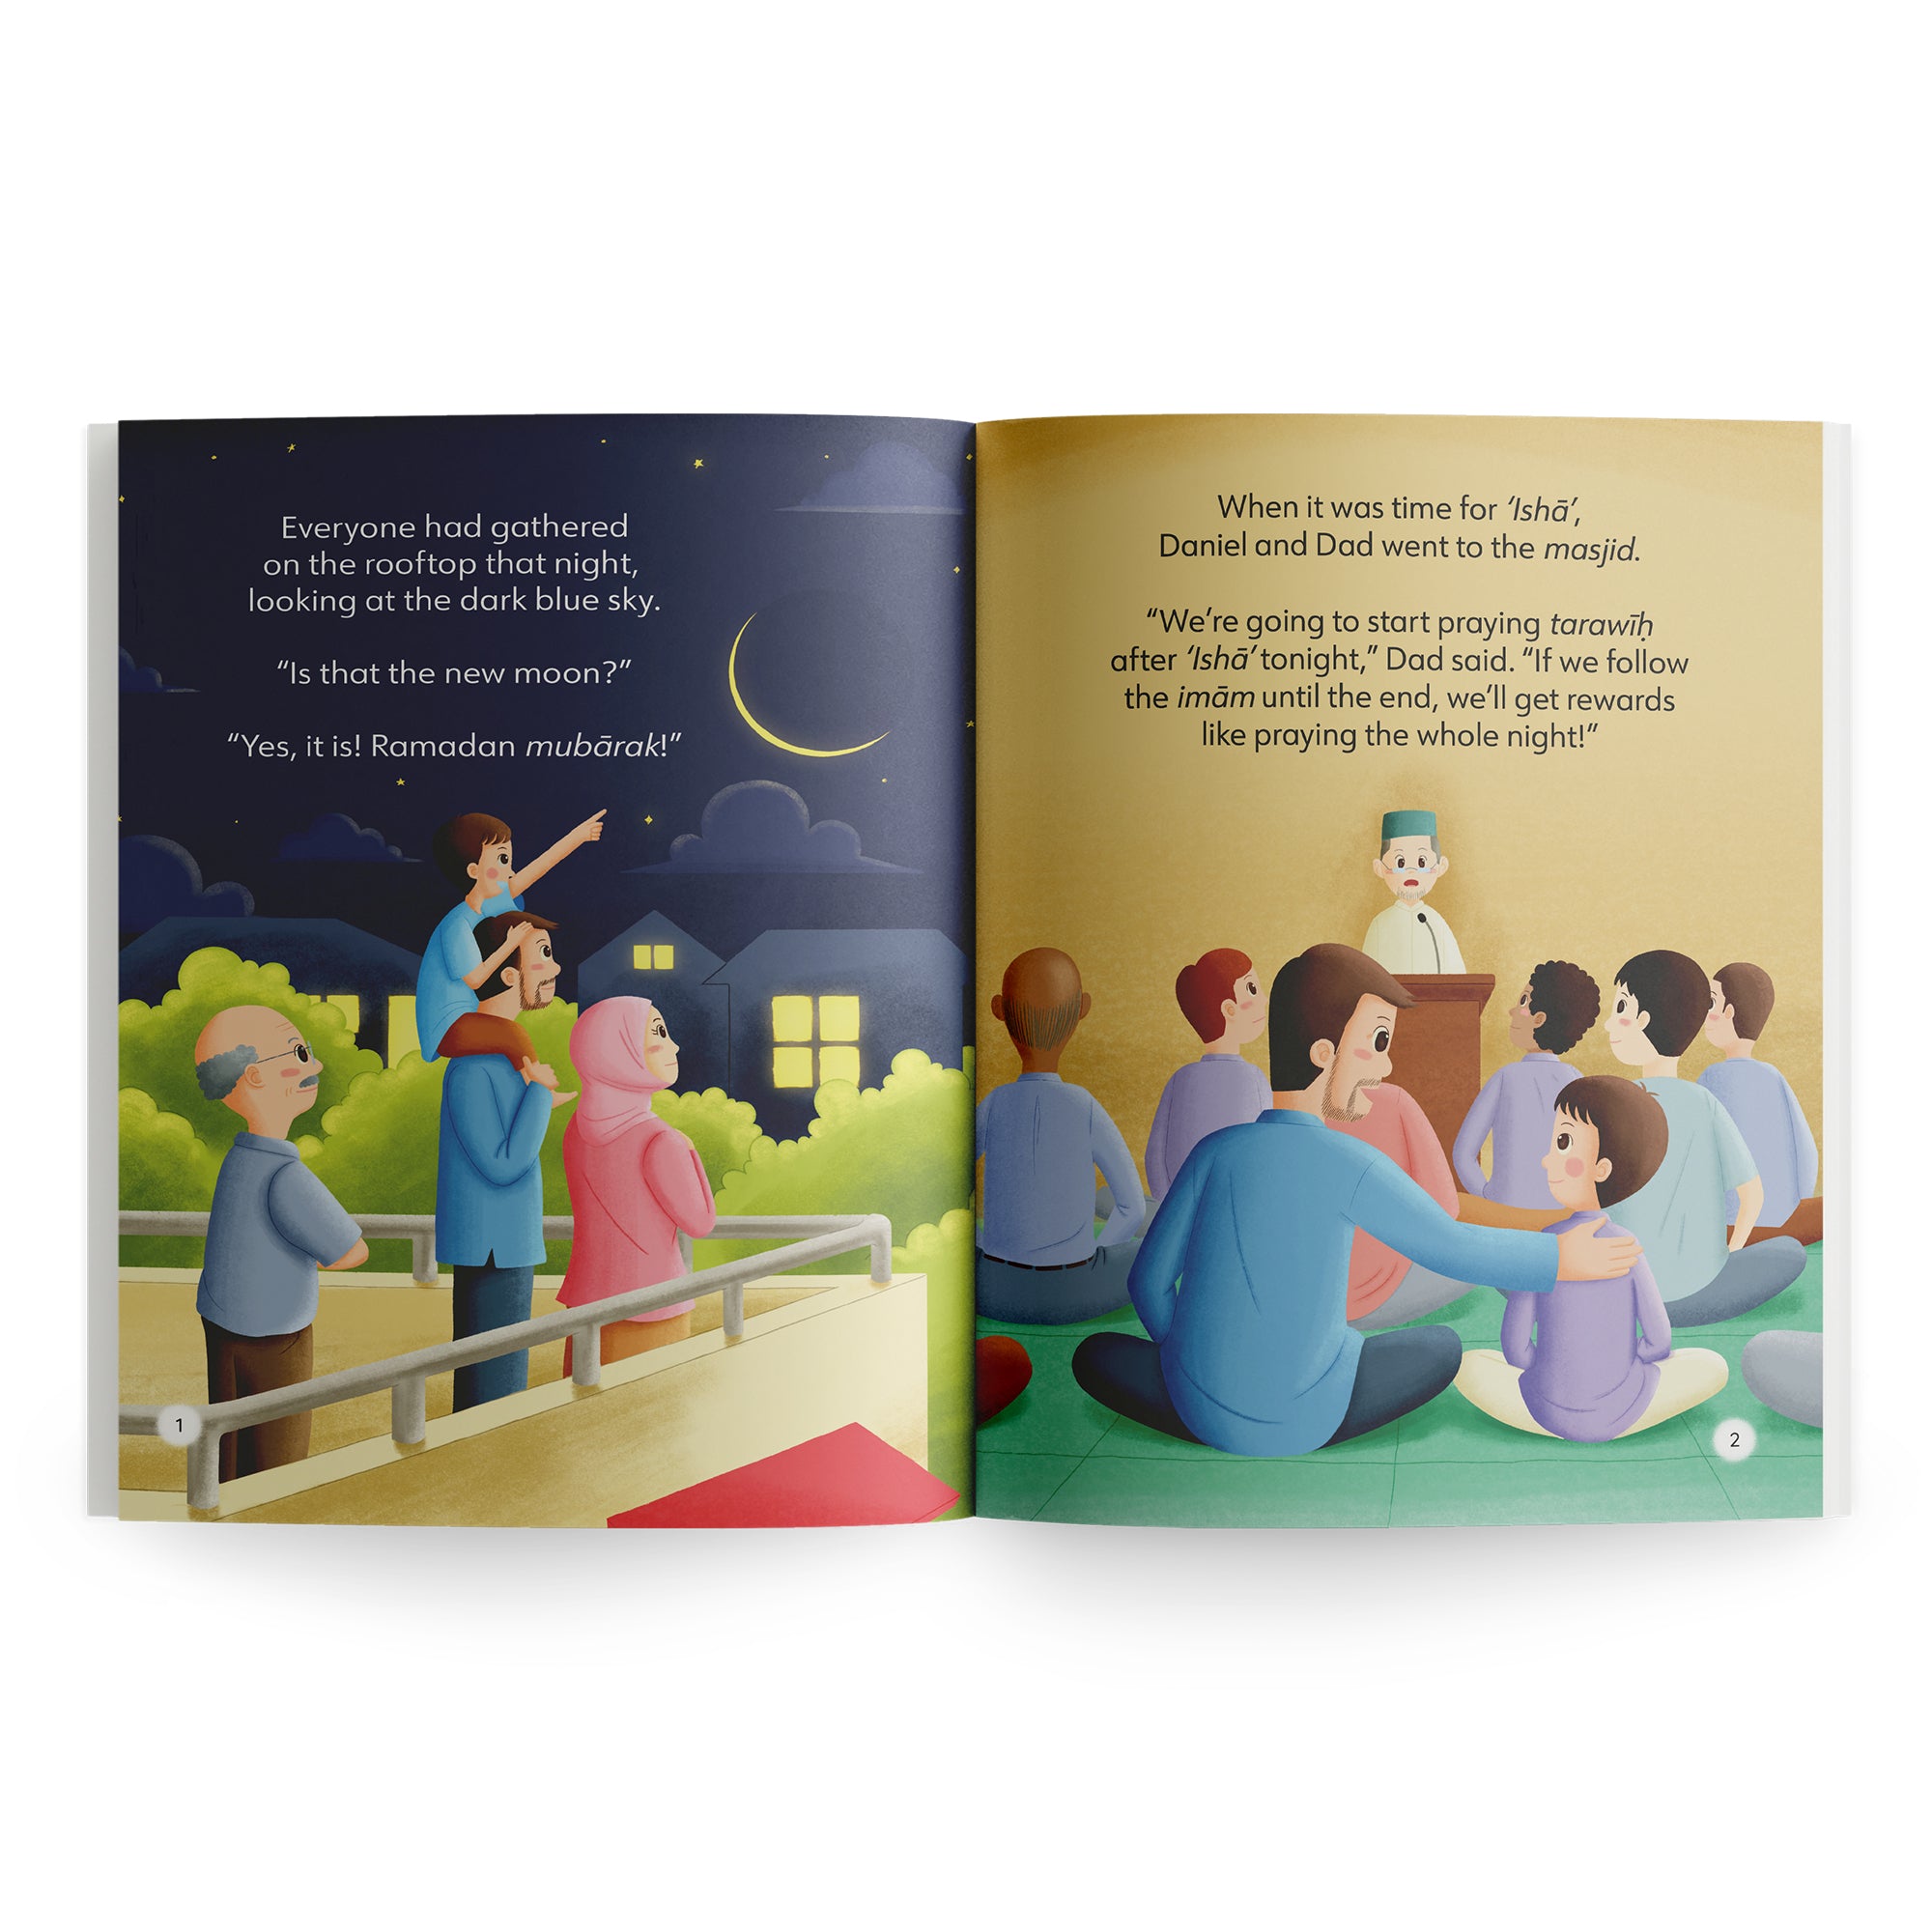 What I Would Like for Ramadan: Story & Activity Book